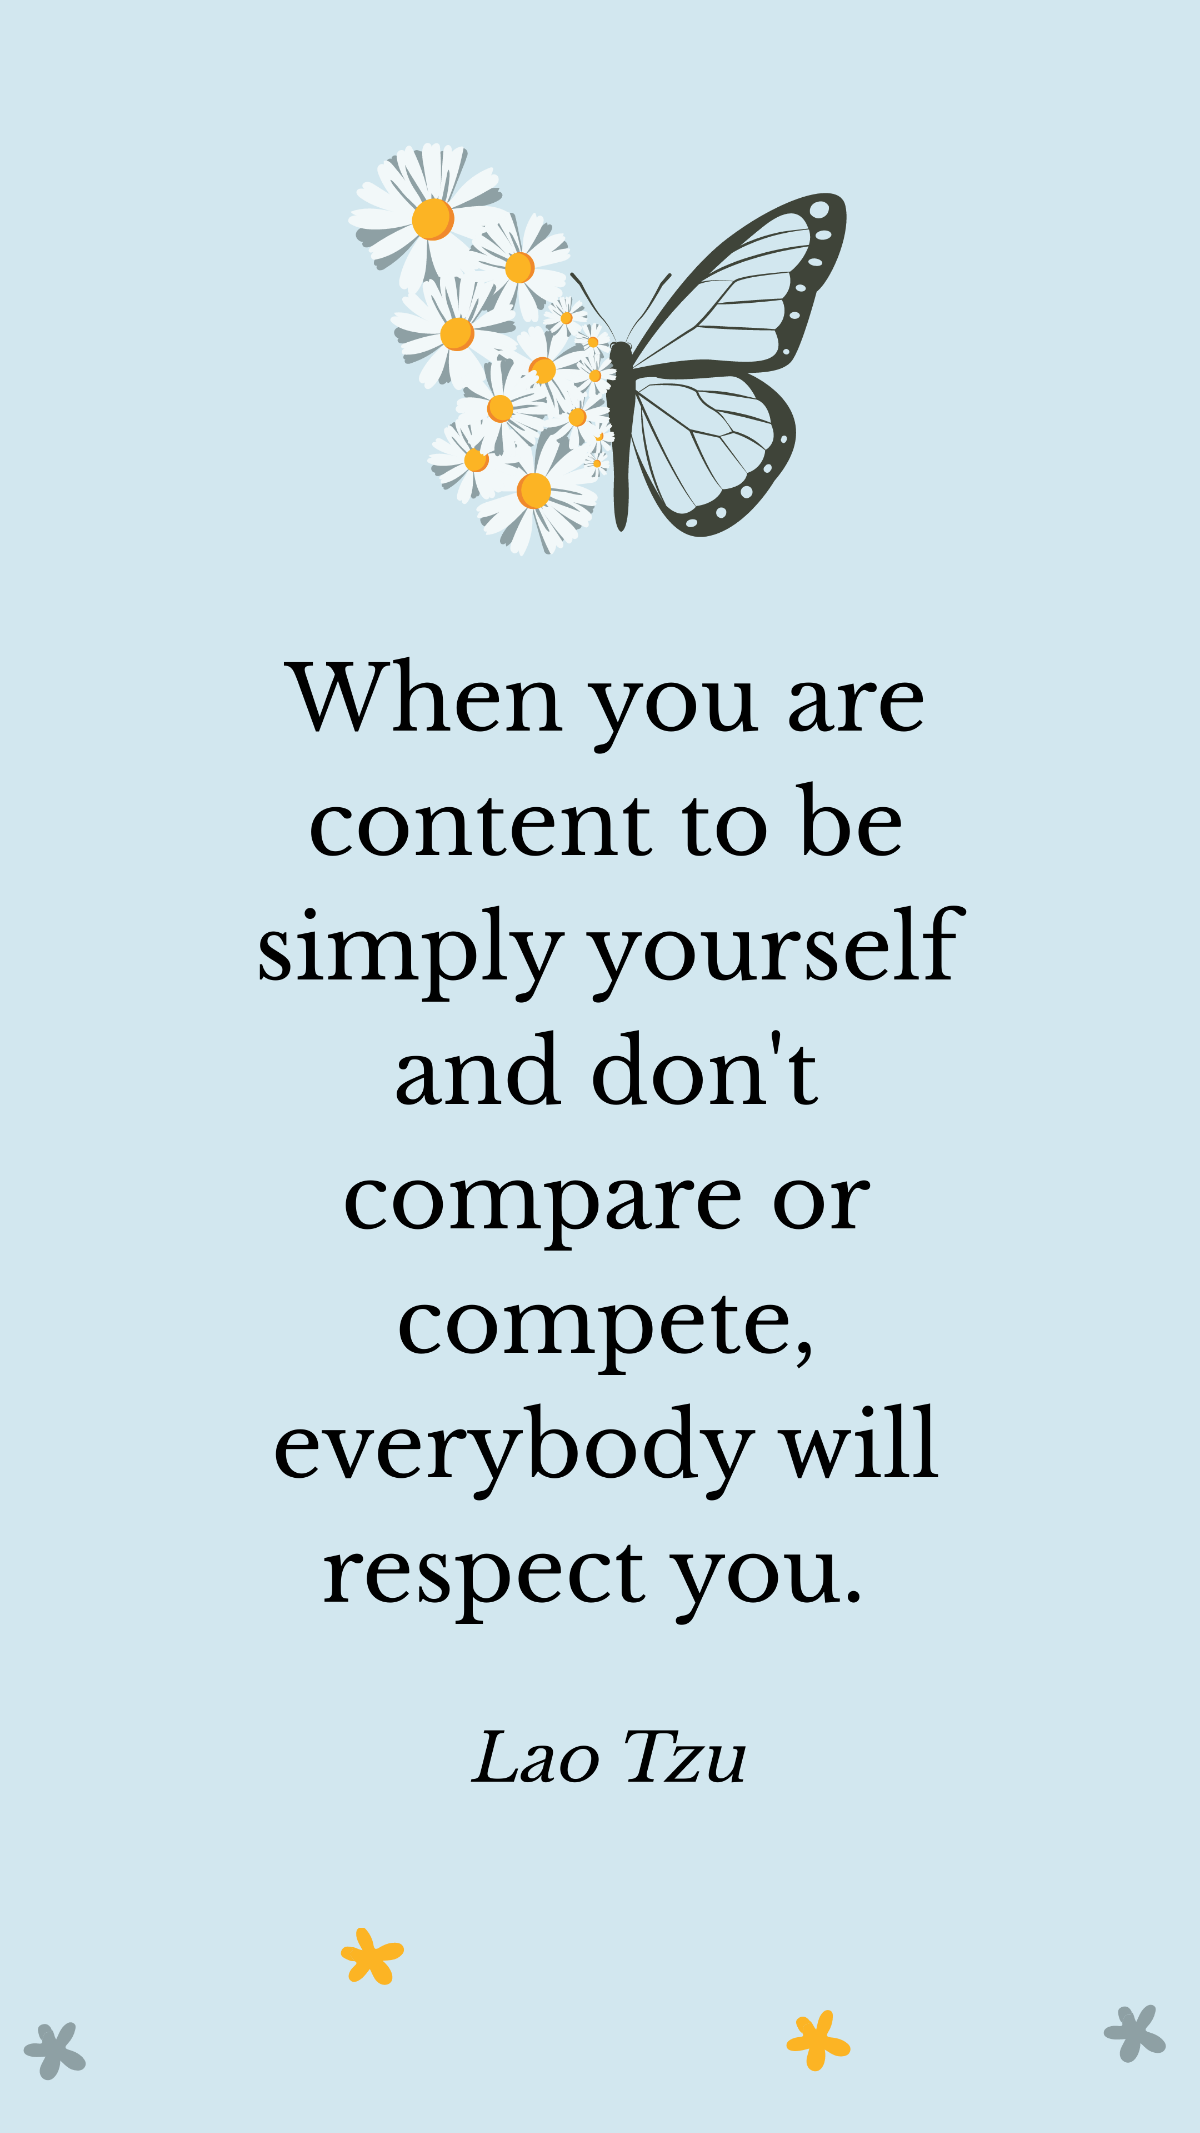 Lao Tzu - When you are content to be simply yourself and don't compare or compete, everybody will respect you. Template